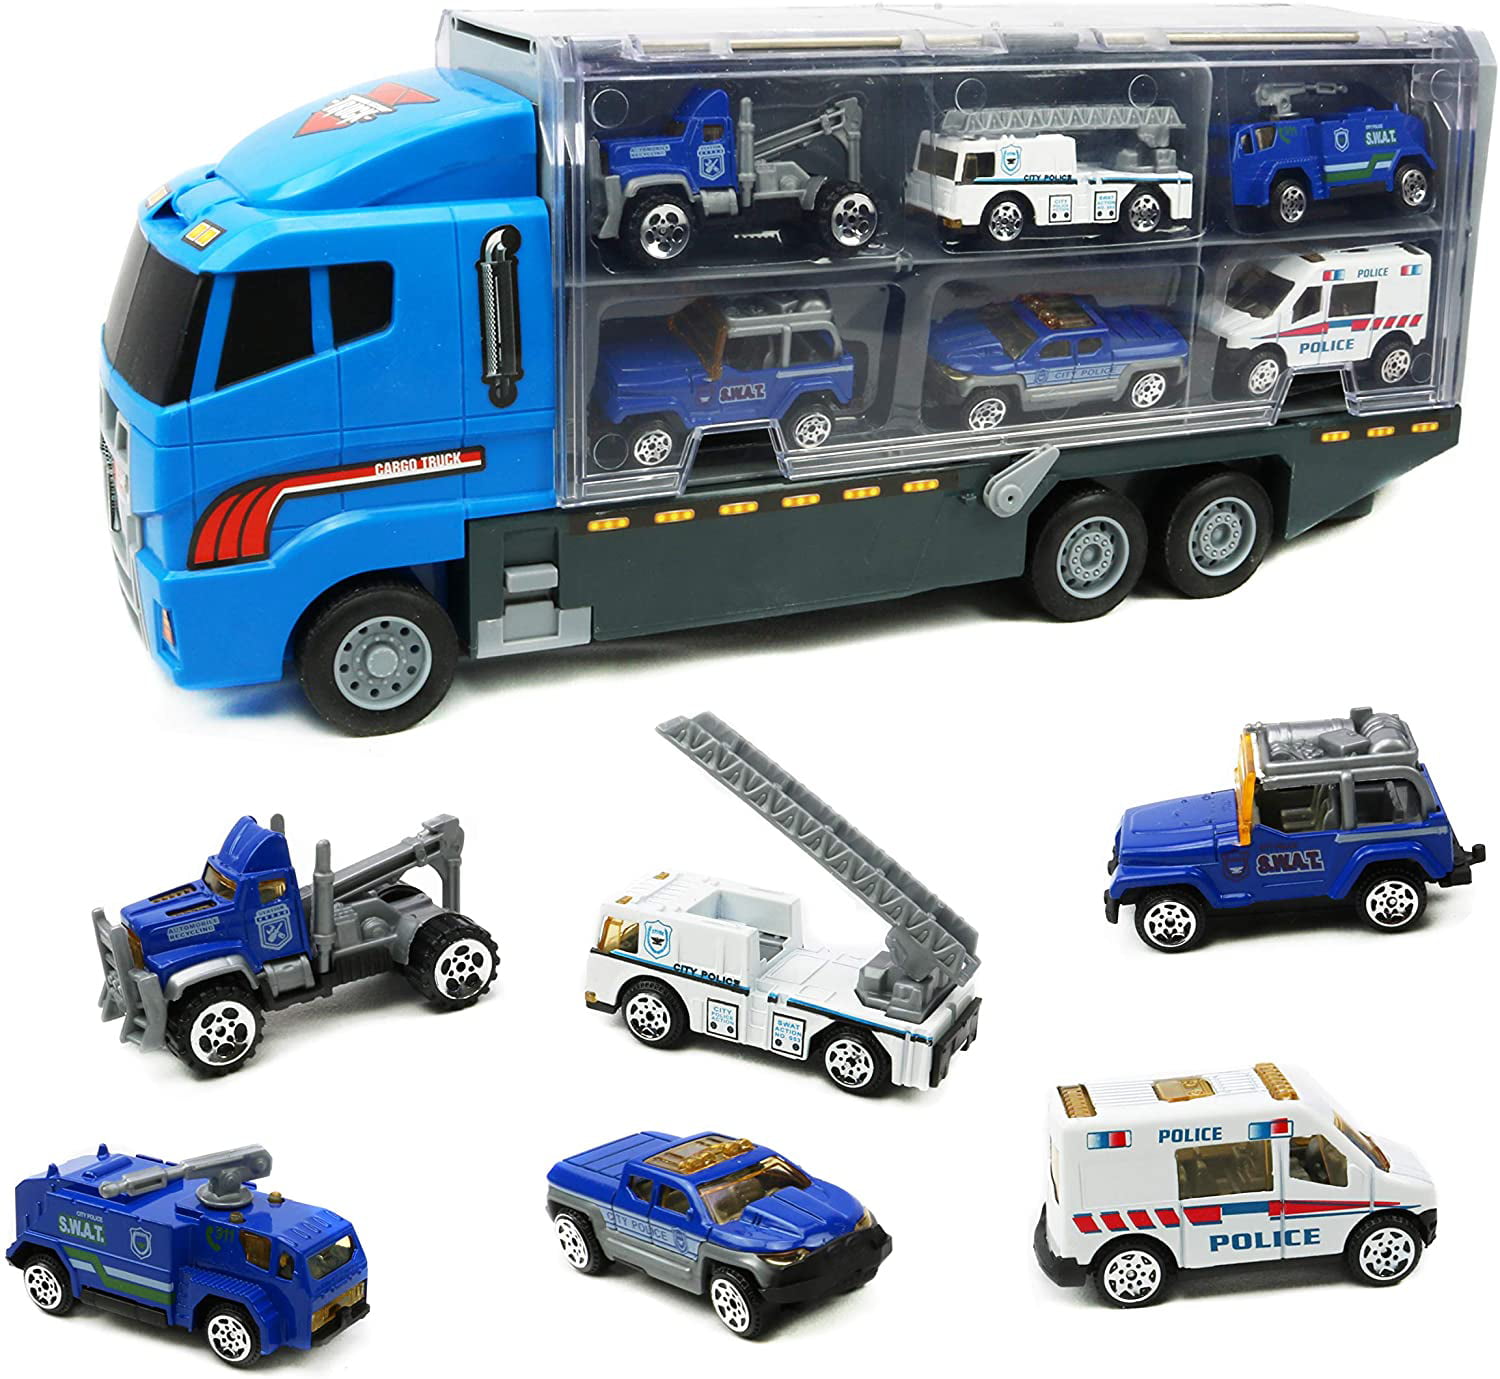 HUGE bundle of toy cars die cast hotwheels police ambulance airport construction